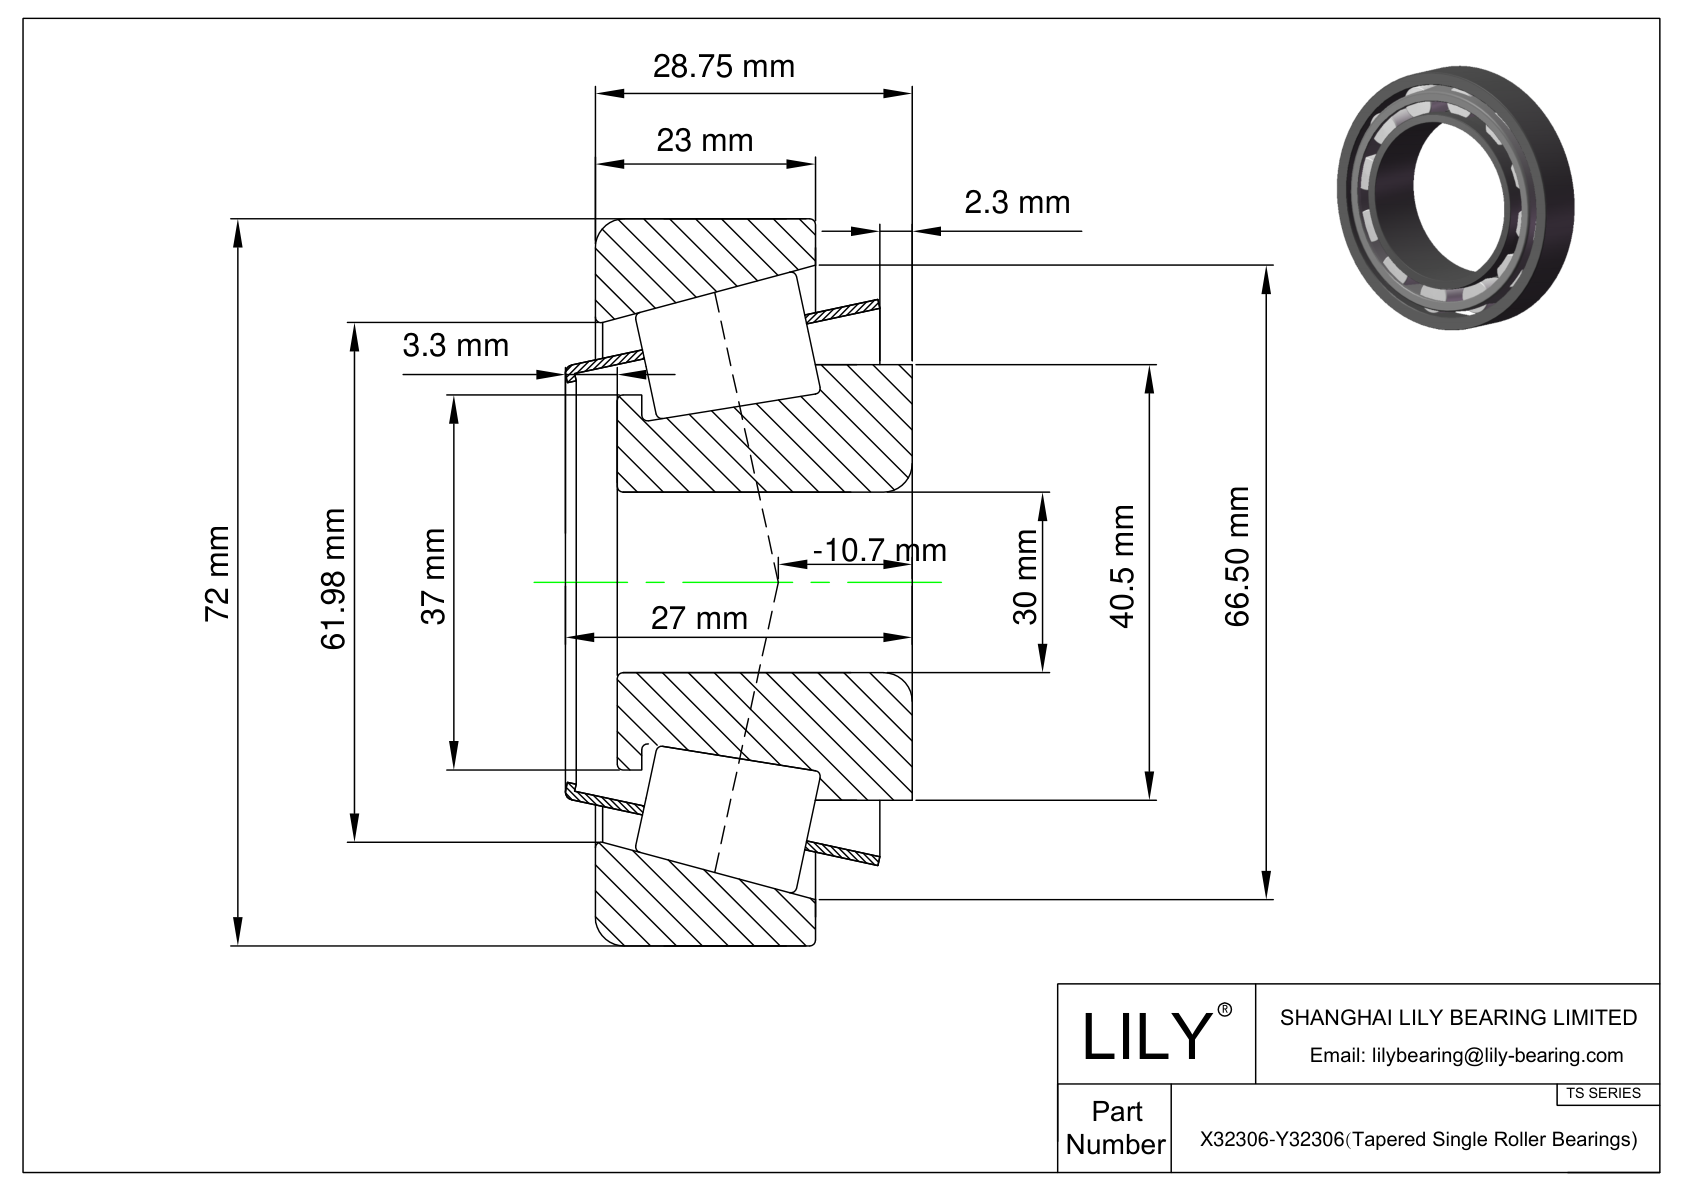 X32306-Y32306 TS (Tapered Single Roller Bearings) (Metric) cad drawing